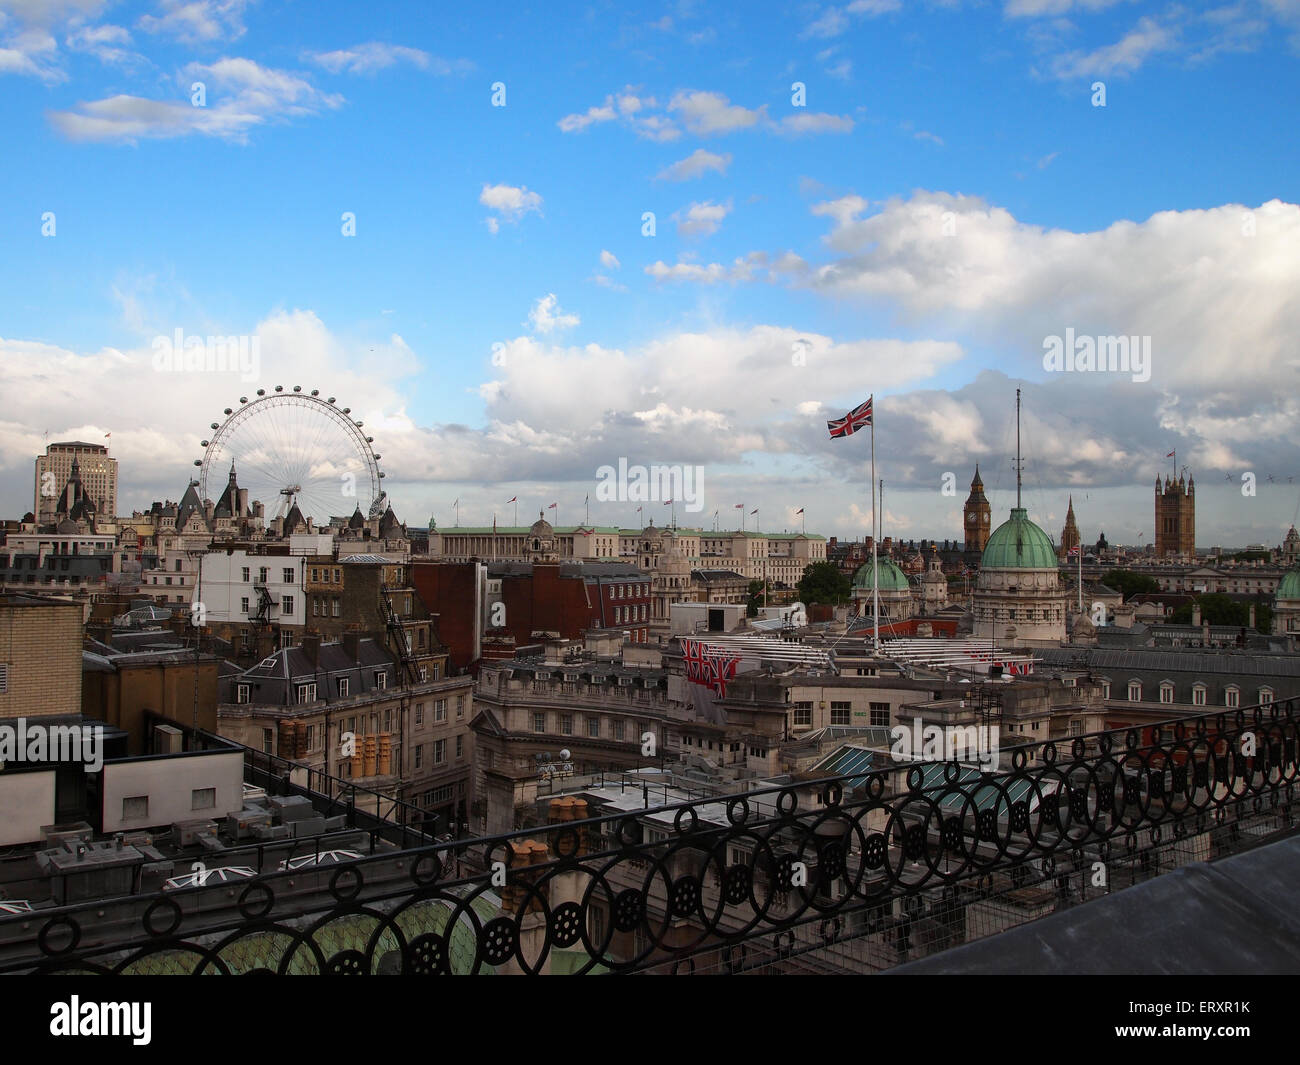 London landscape from the rooftop Stock Photo